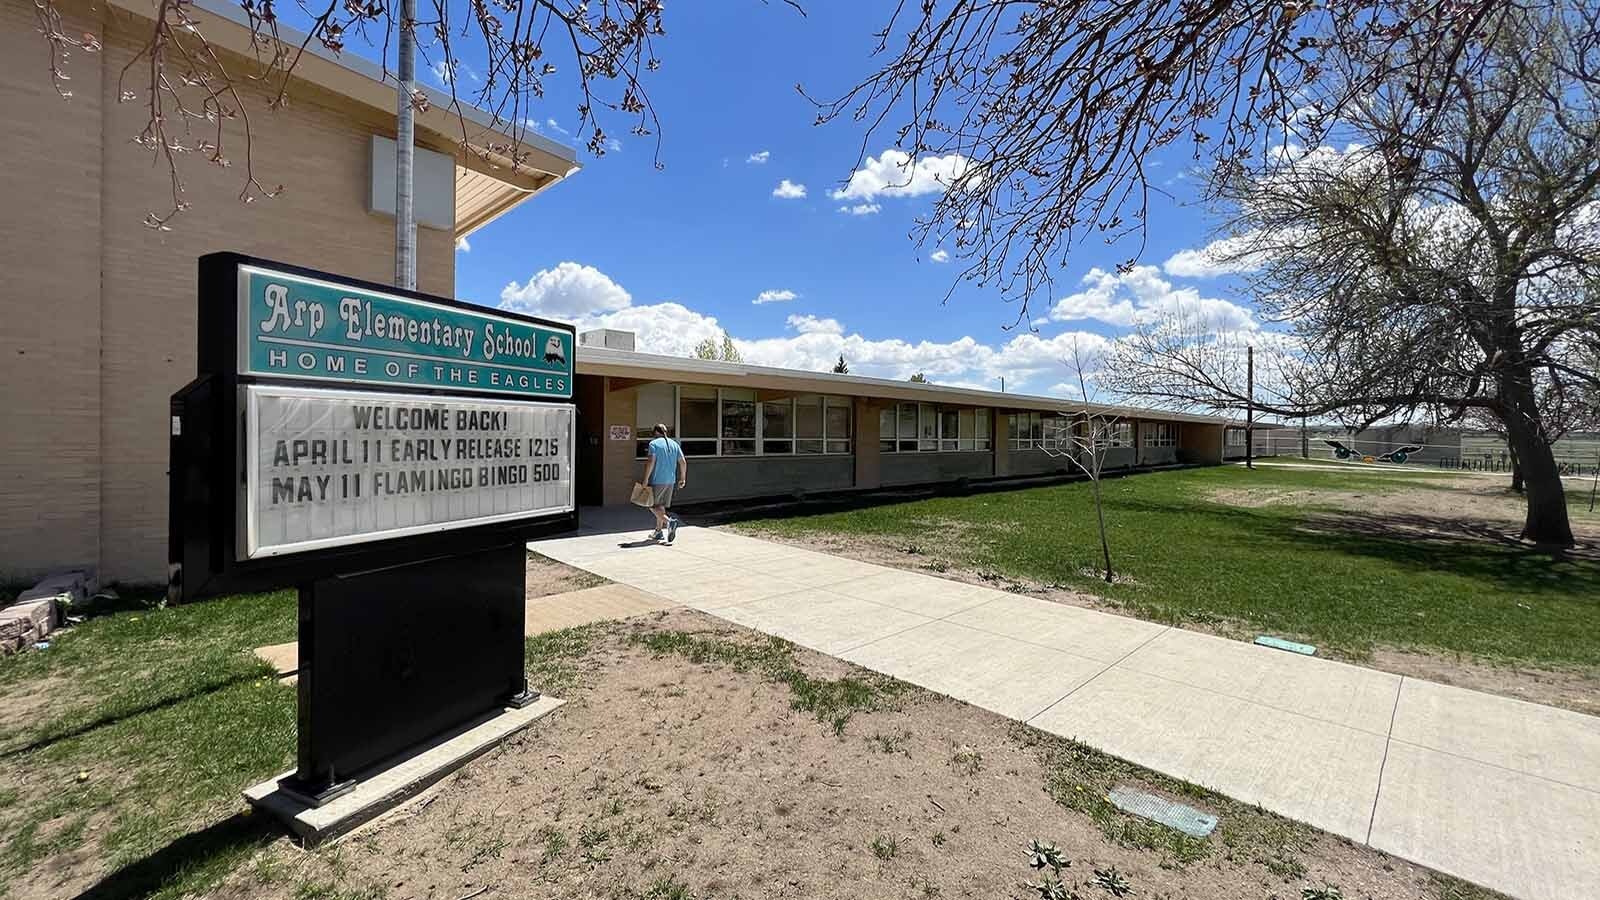 Arp Elementary School in Cheyenne sits vacant and crumbling after being deemed unfit to house students anymore after it was found to be infested with vermin and sewage.